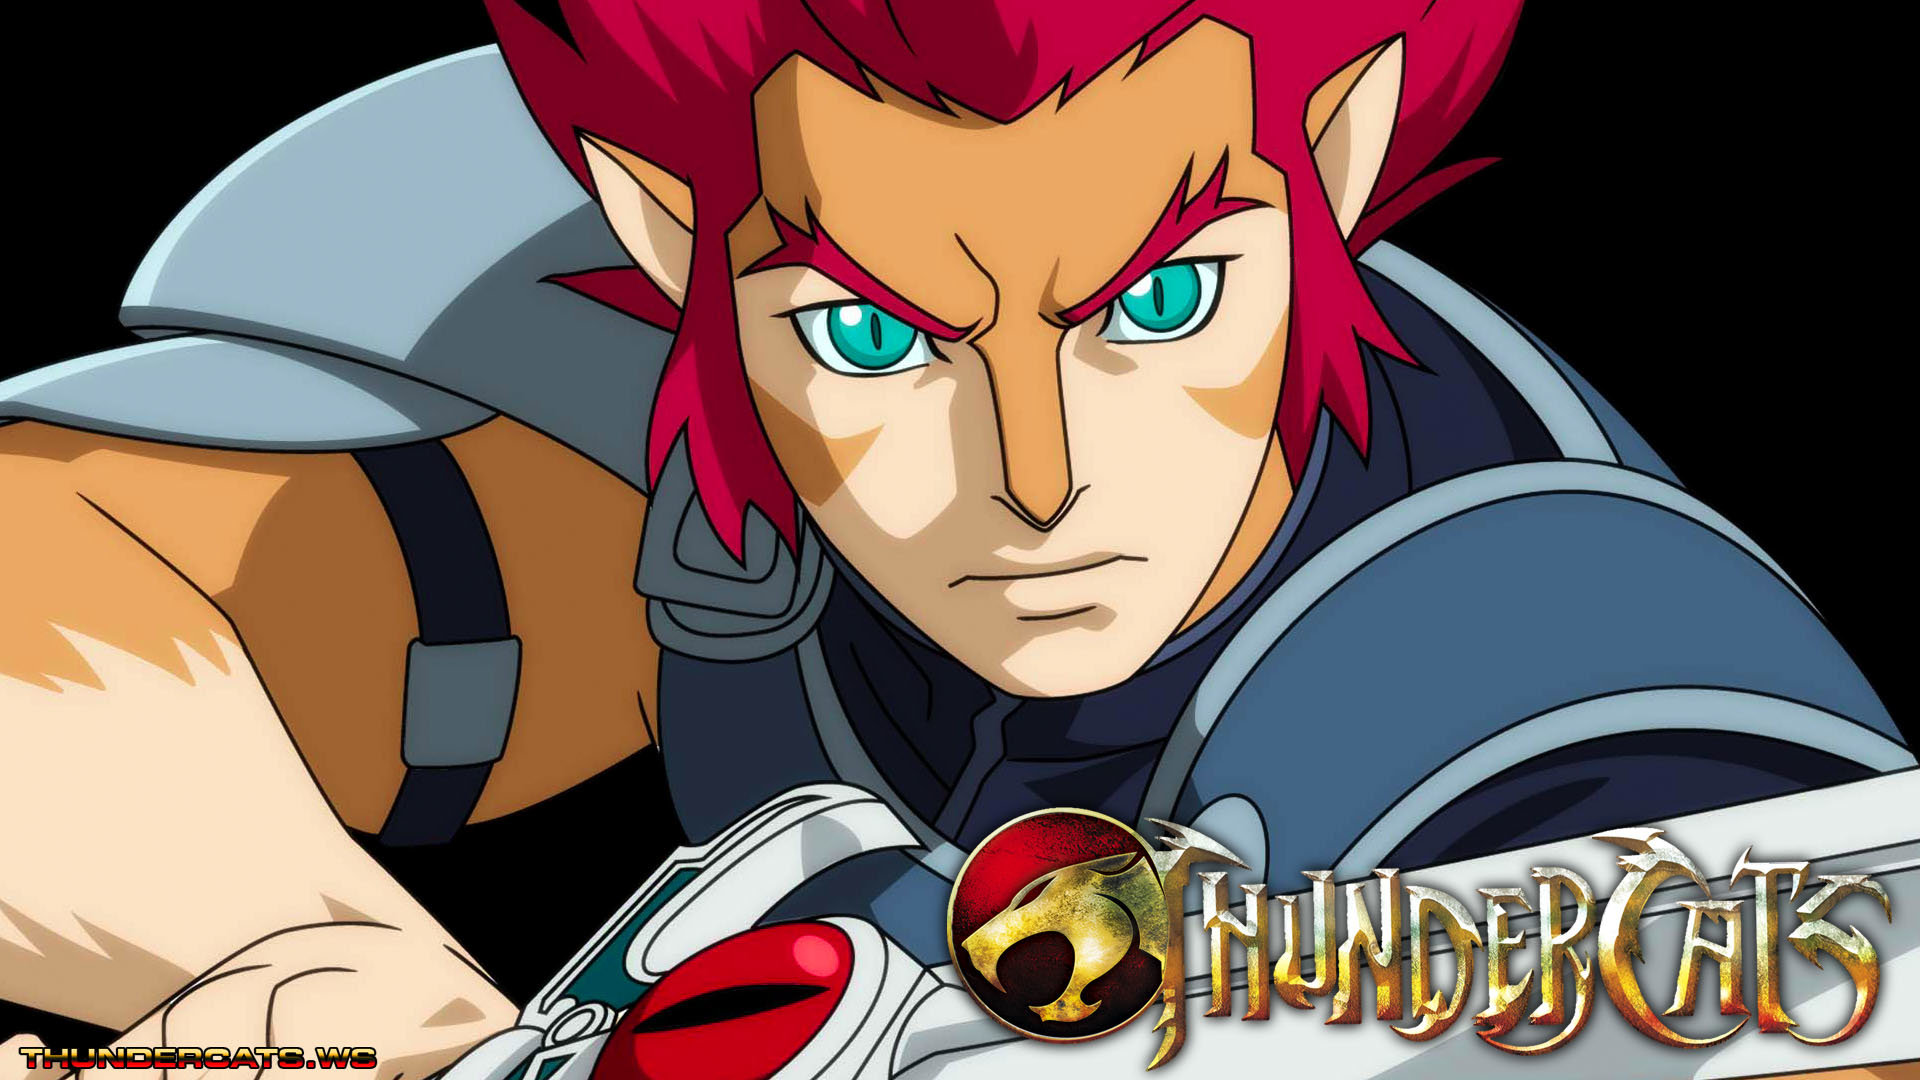 Download full hd 1080p Thundercats PC wallpaper ID:186408 for free